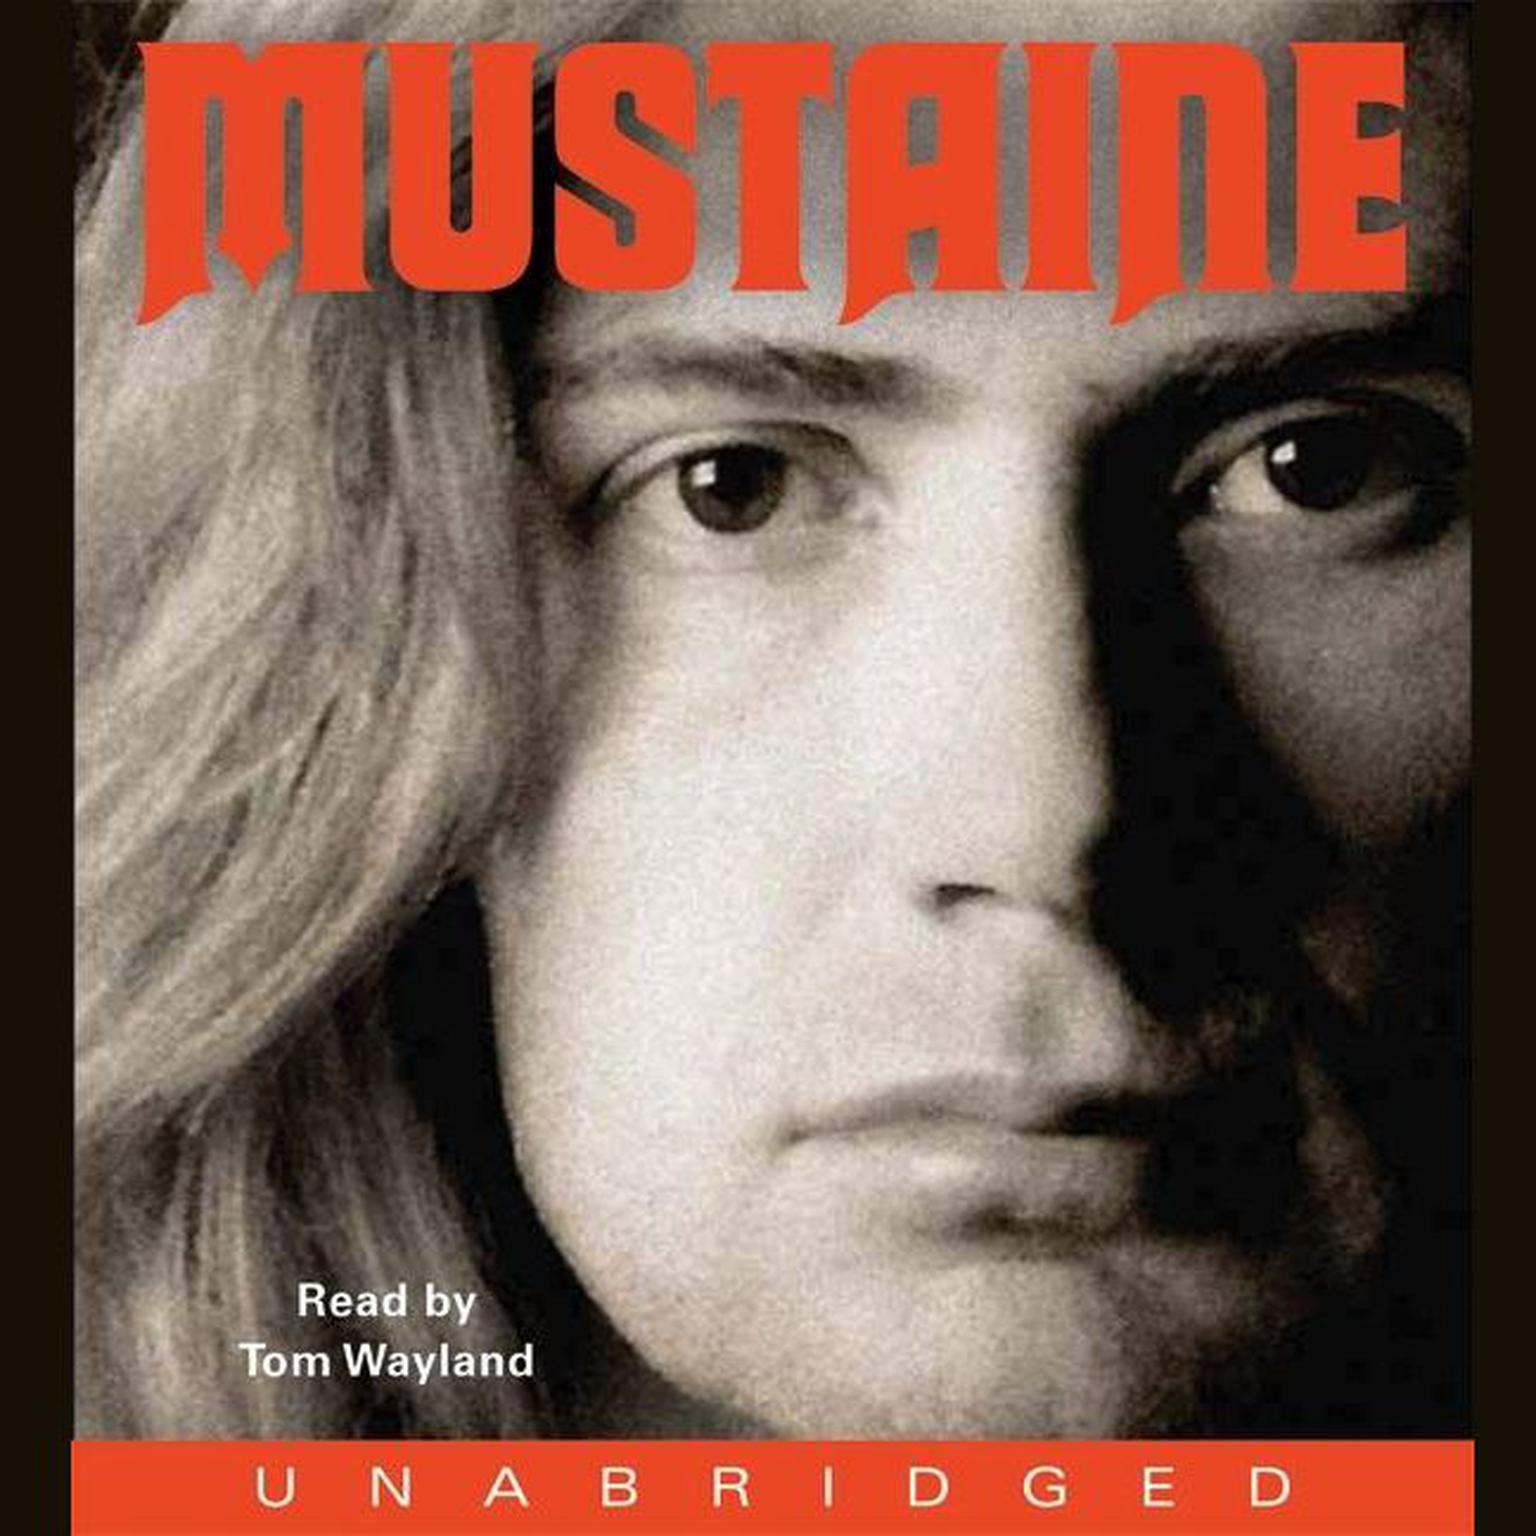 Mustaine: A Heavy Metal Memoir Audiobook, by Dave Mustaine